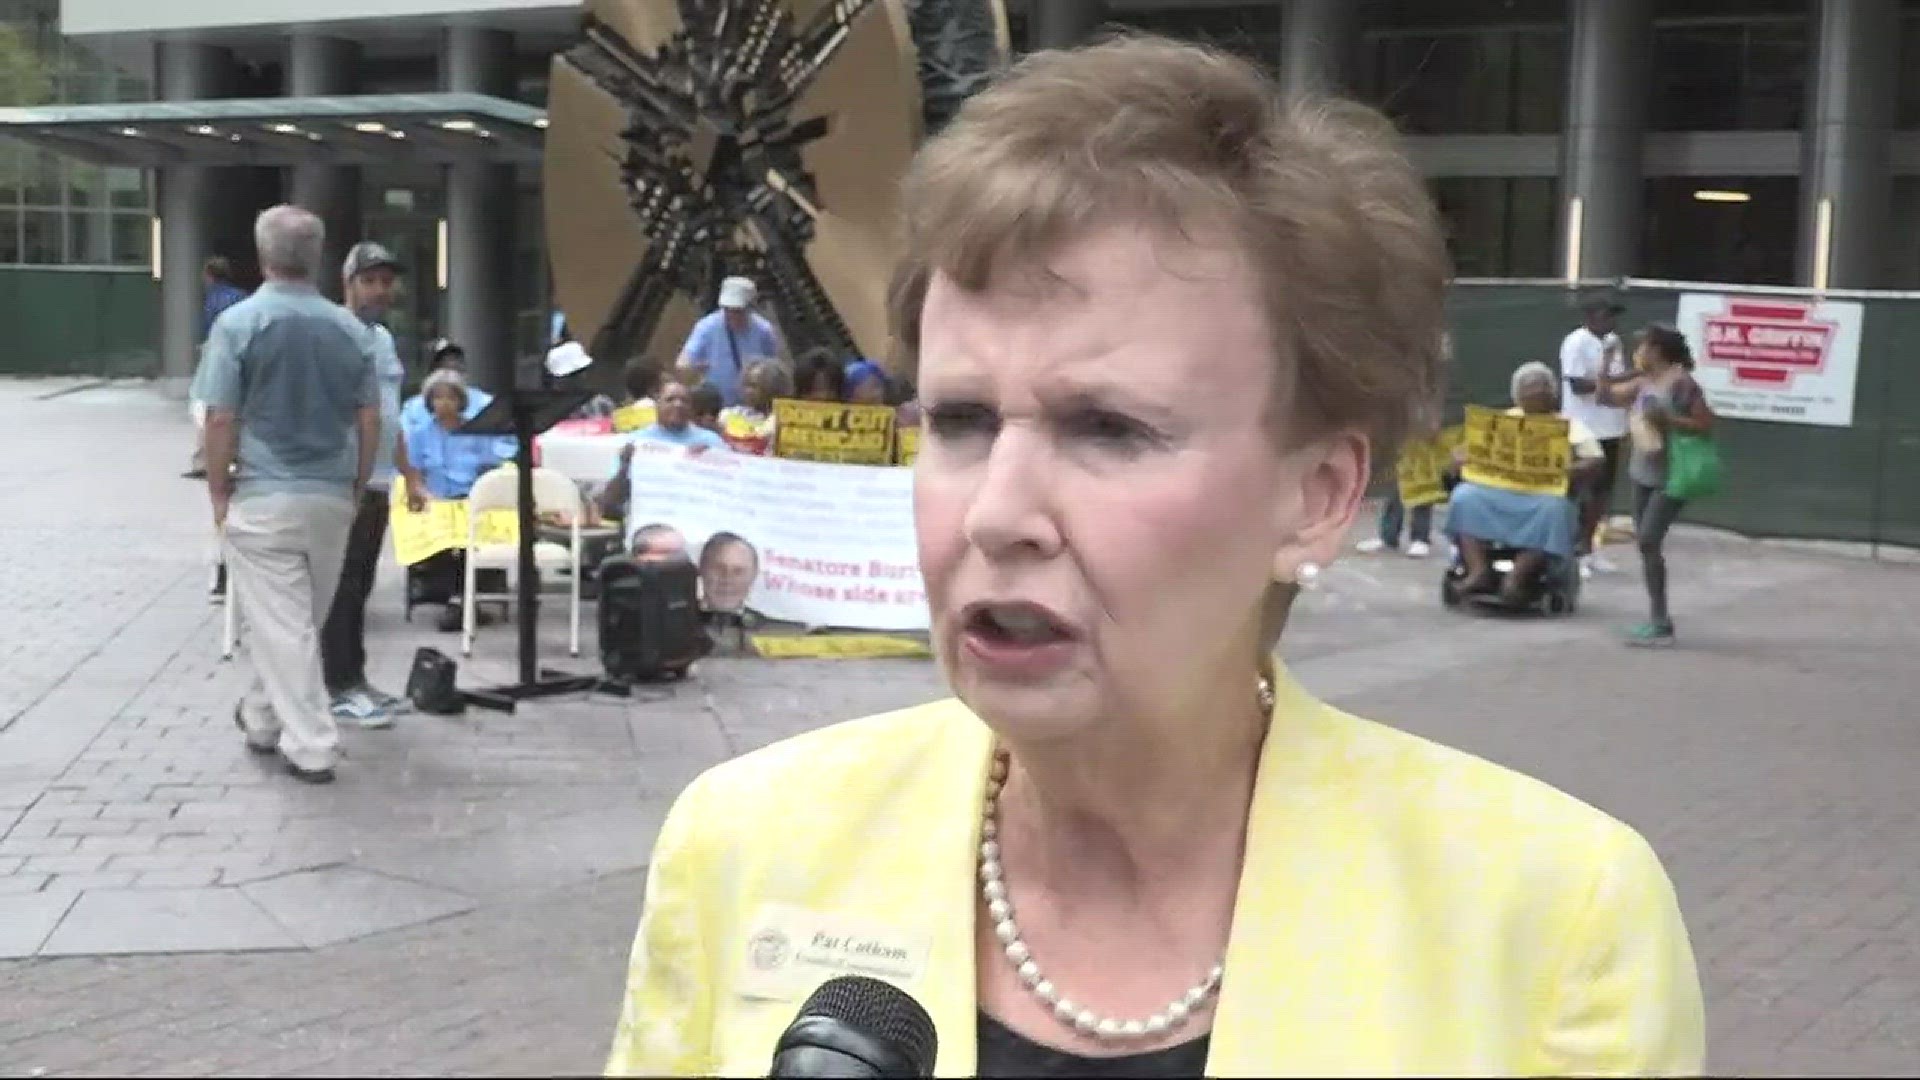 "I was fuming all day about it," Mecklenburg County Commissioner Pat Cotham.